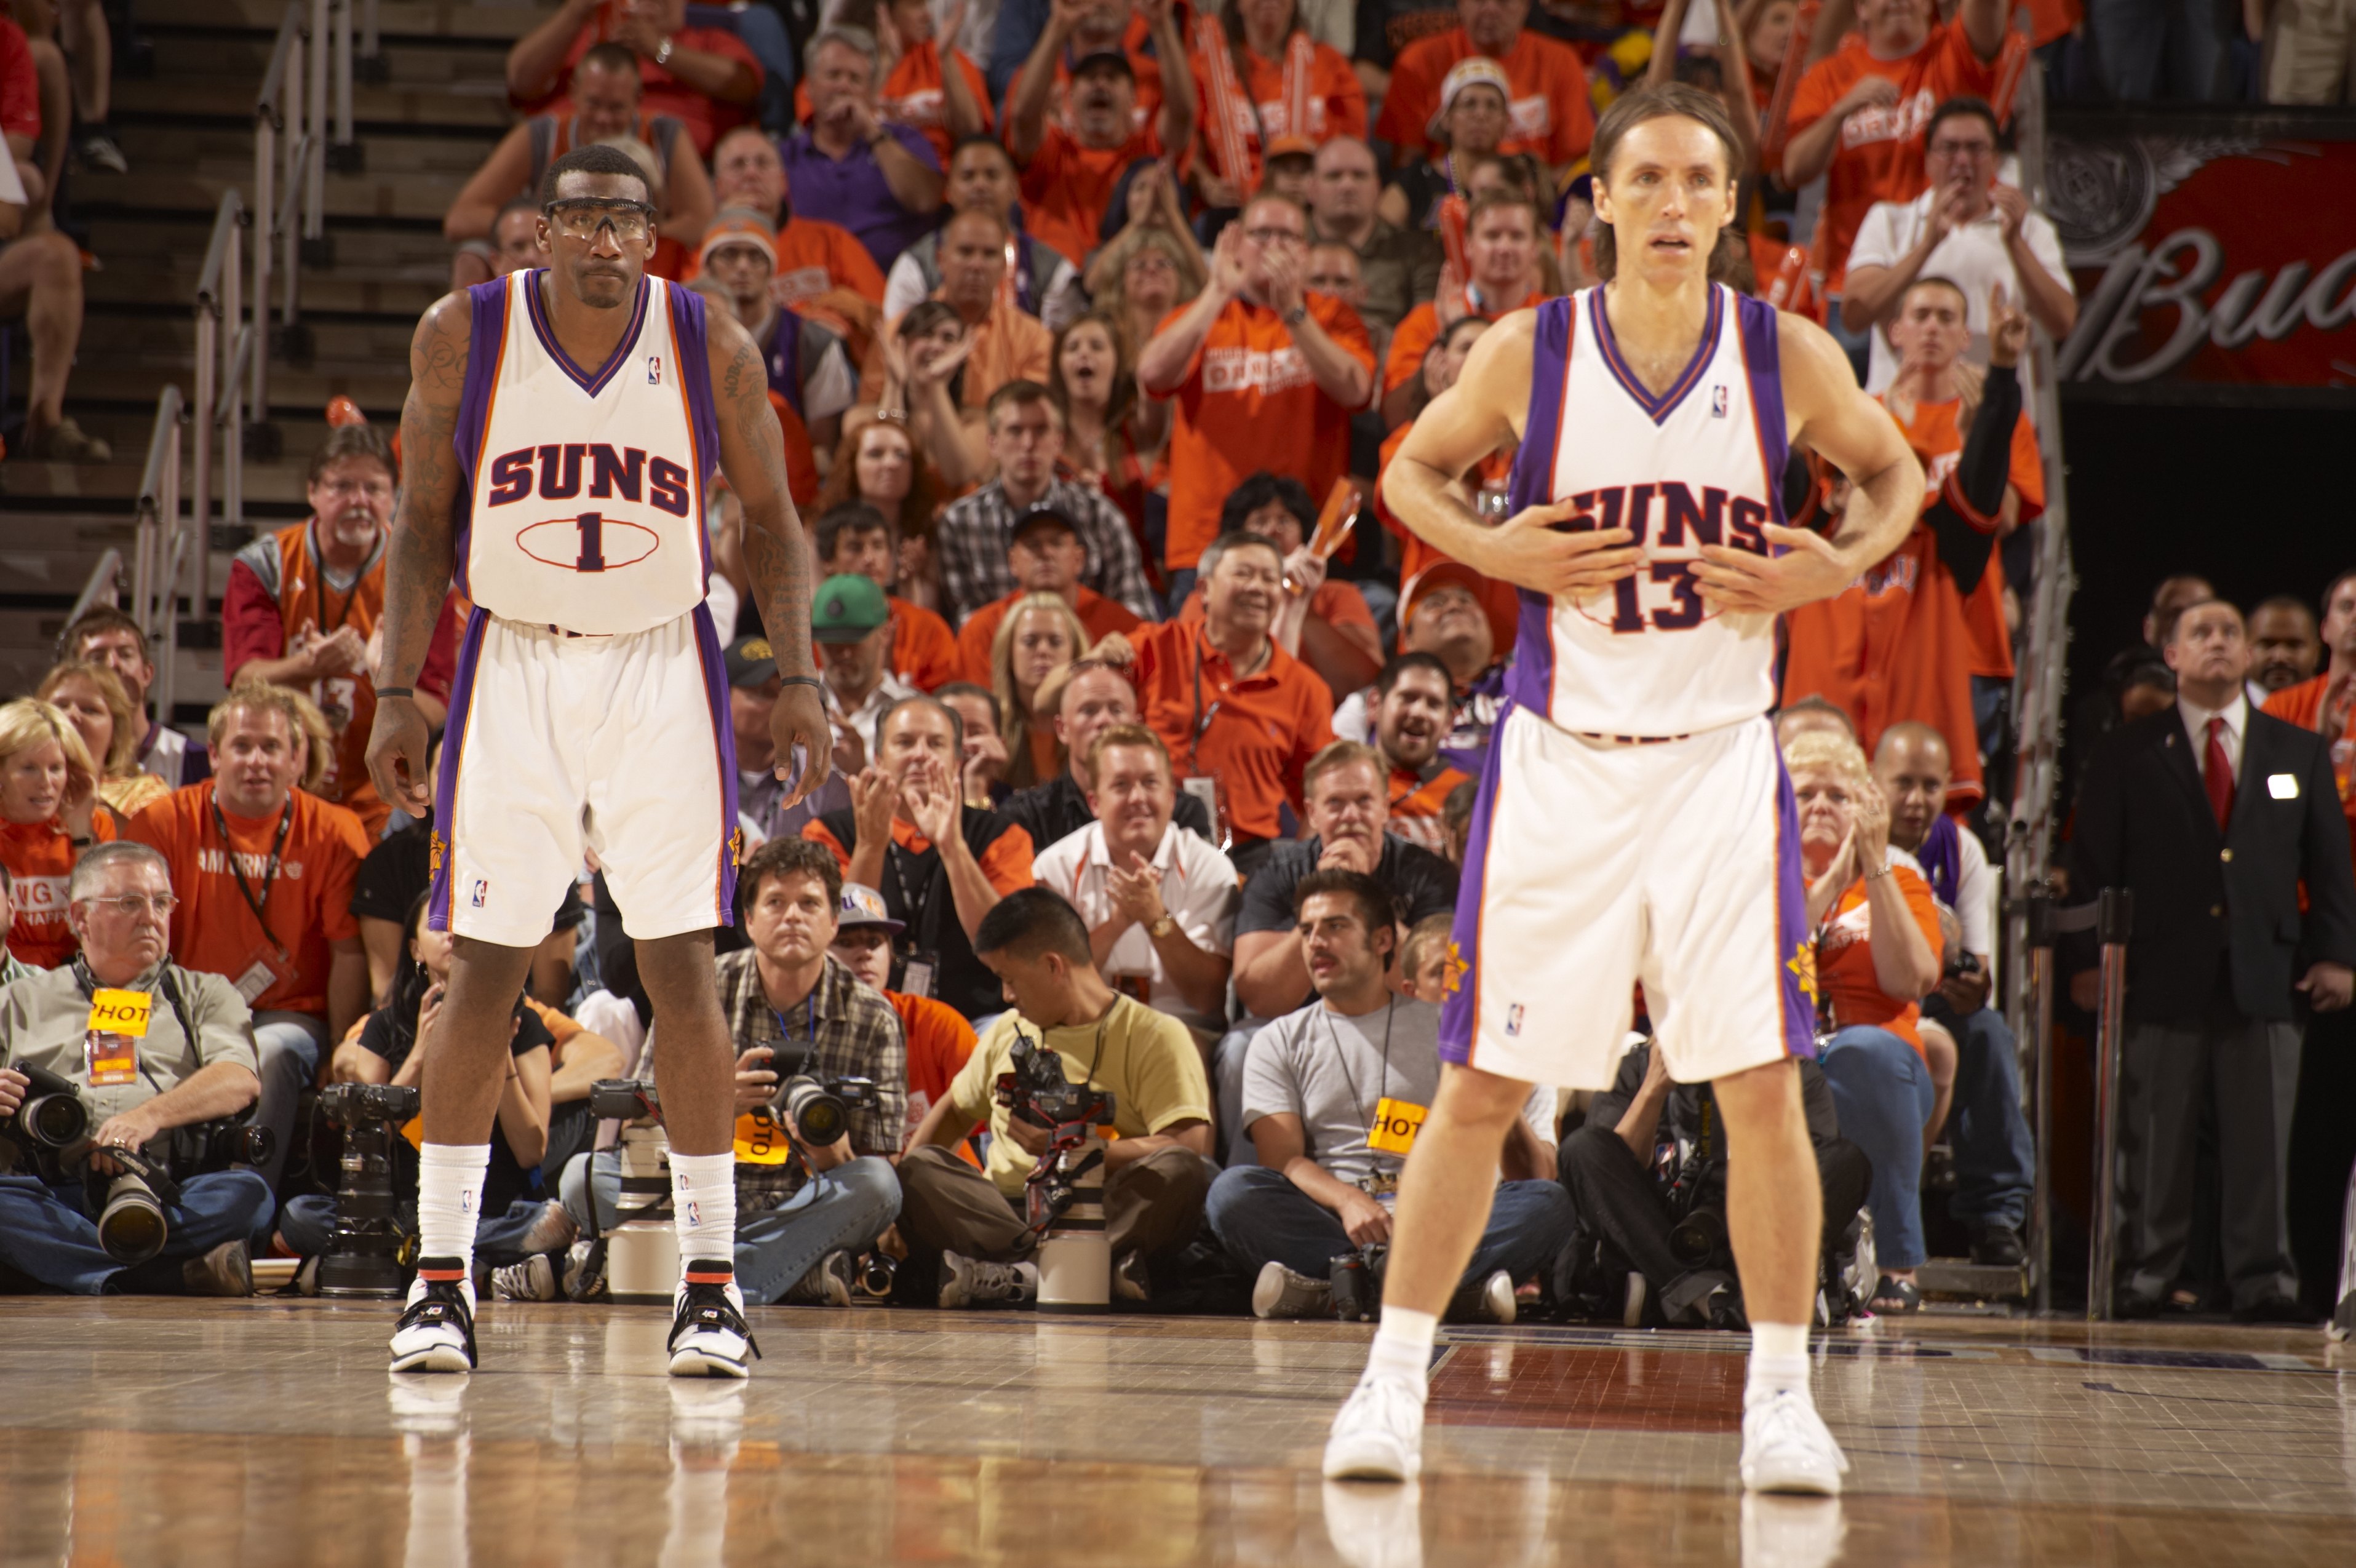 Phoenix Suns: 25 Best Players To Play For The Suns - Page 183830 x 2549